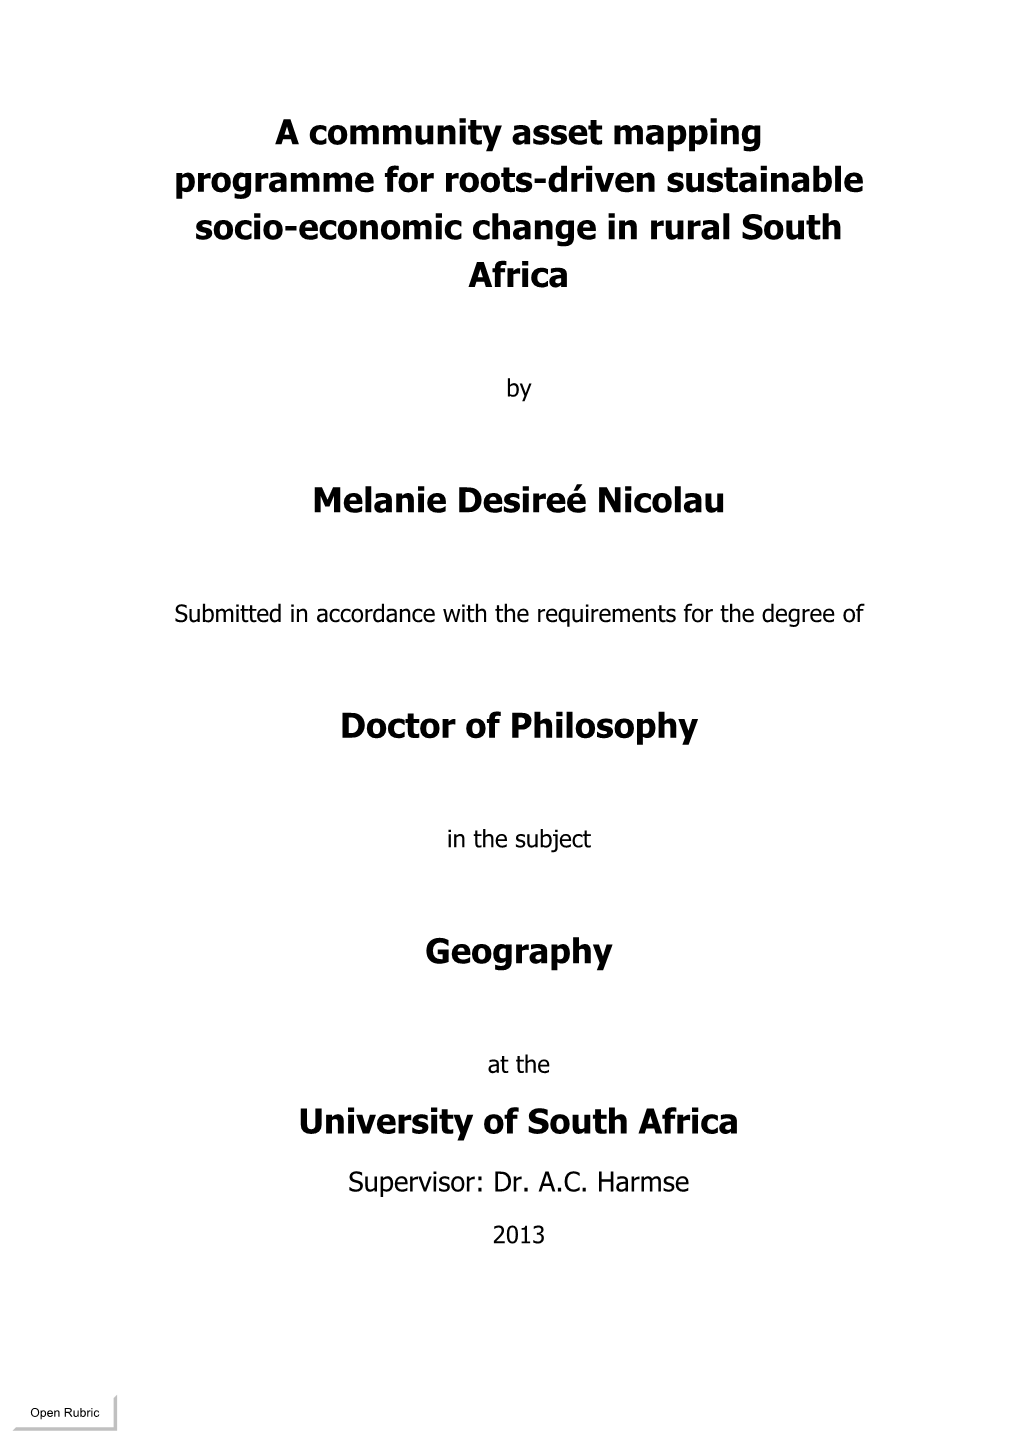 A Community Asset Mapping Programme for Roots-Driven Sustainable Socio-Economic Change in Rural South Africa